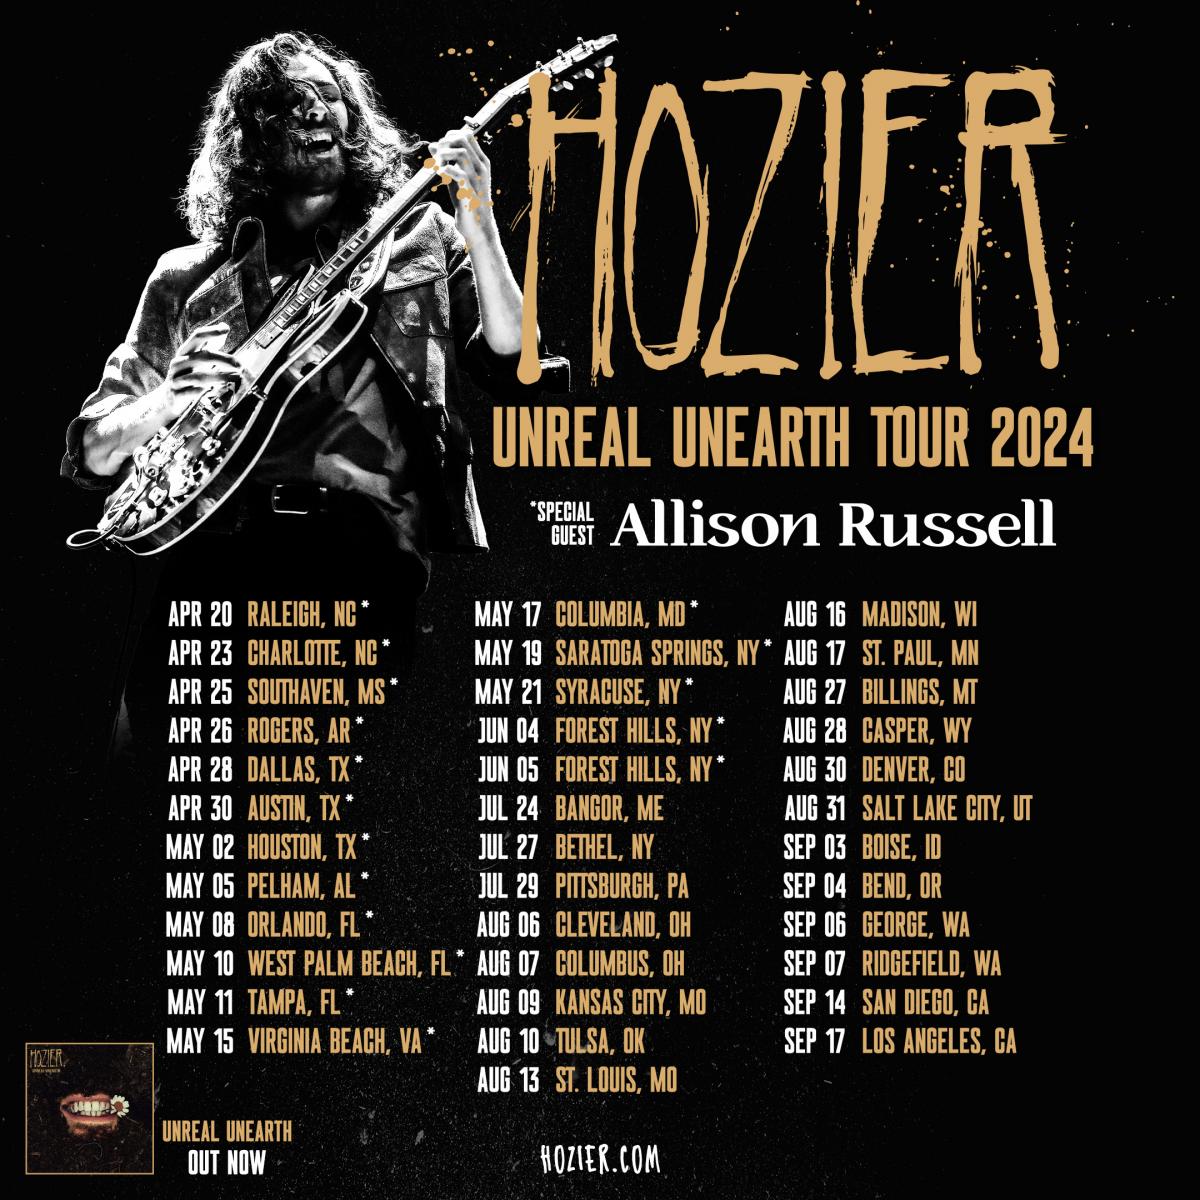 Hozier Extends Unreal Unearth Tour With 2024 North American Shows